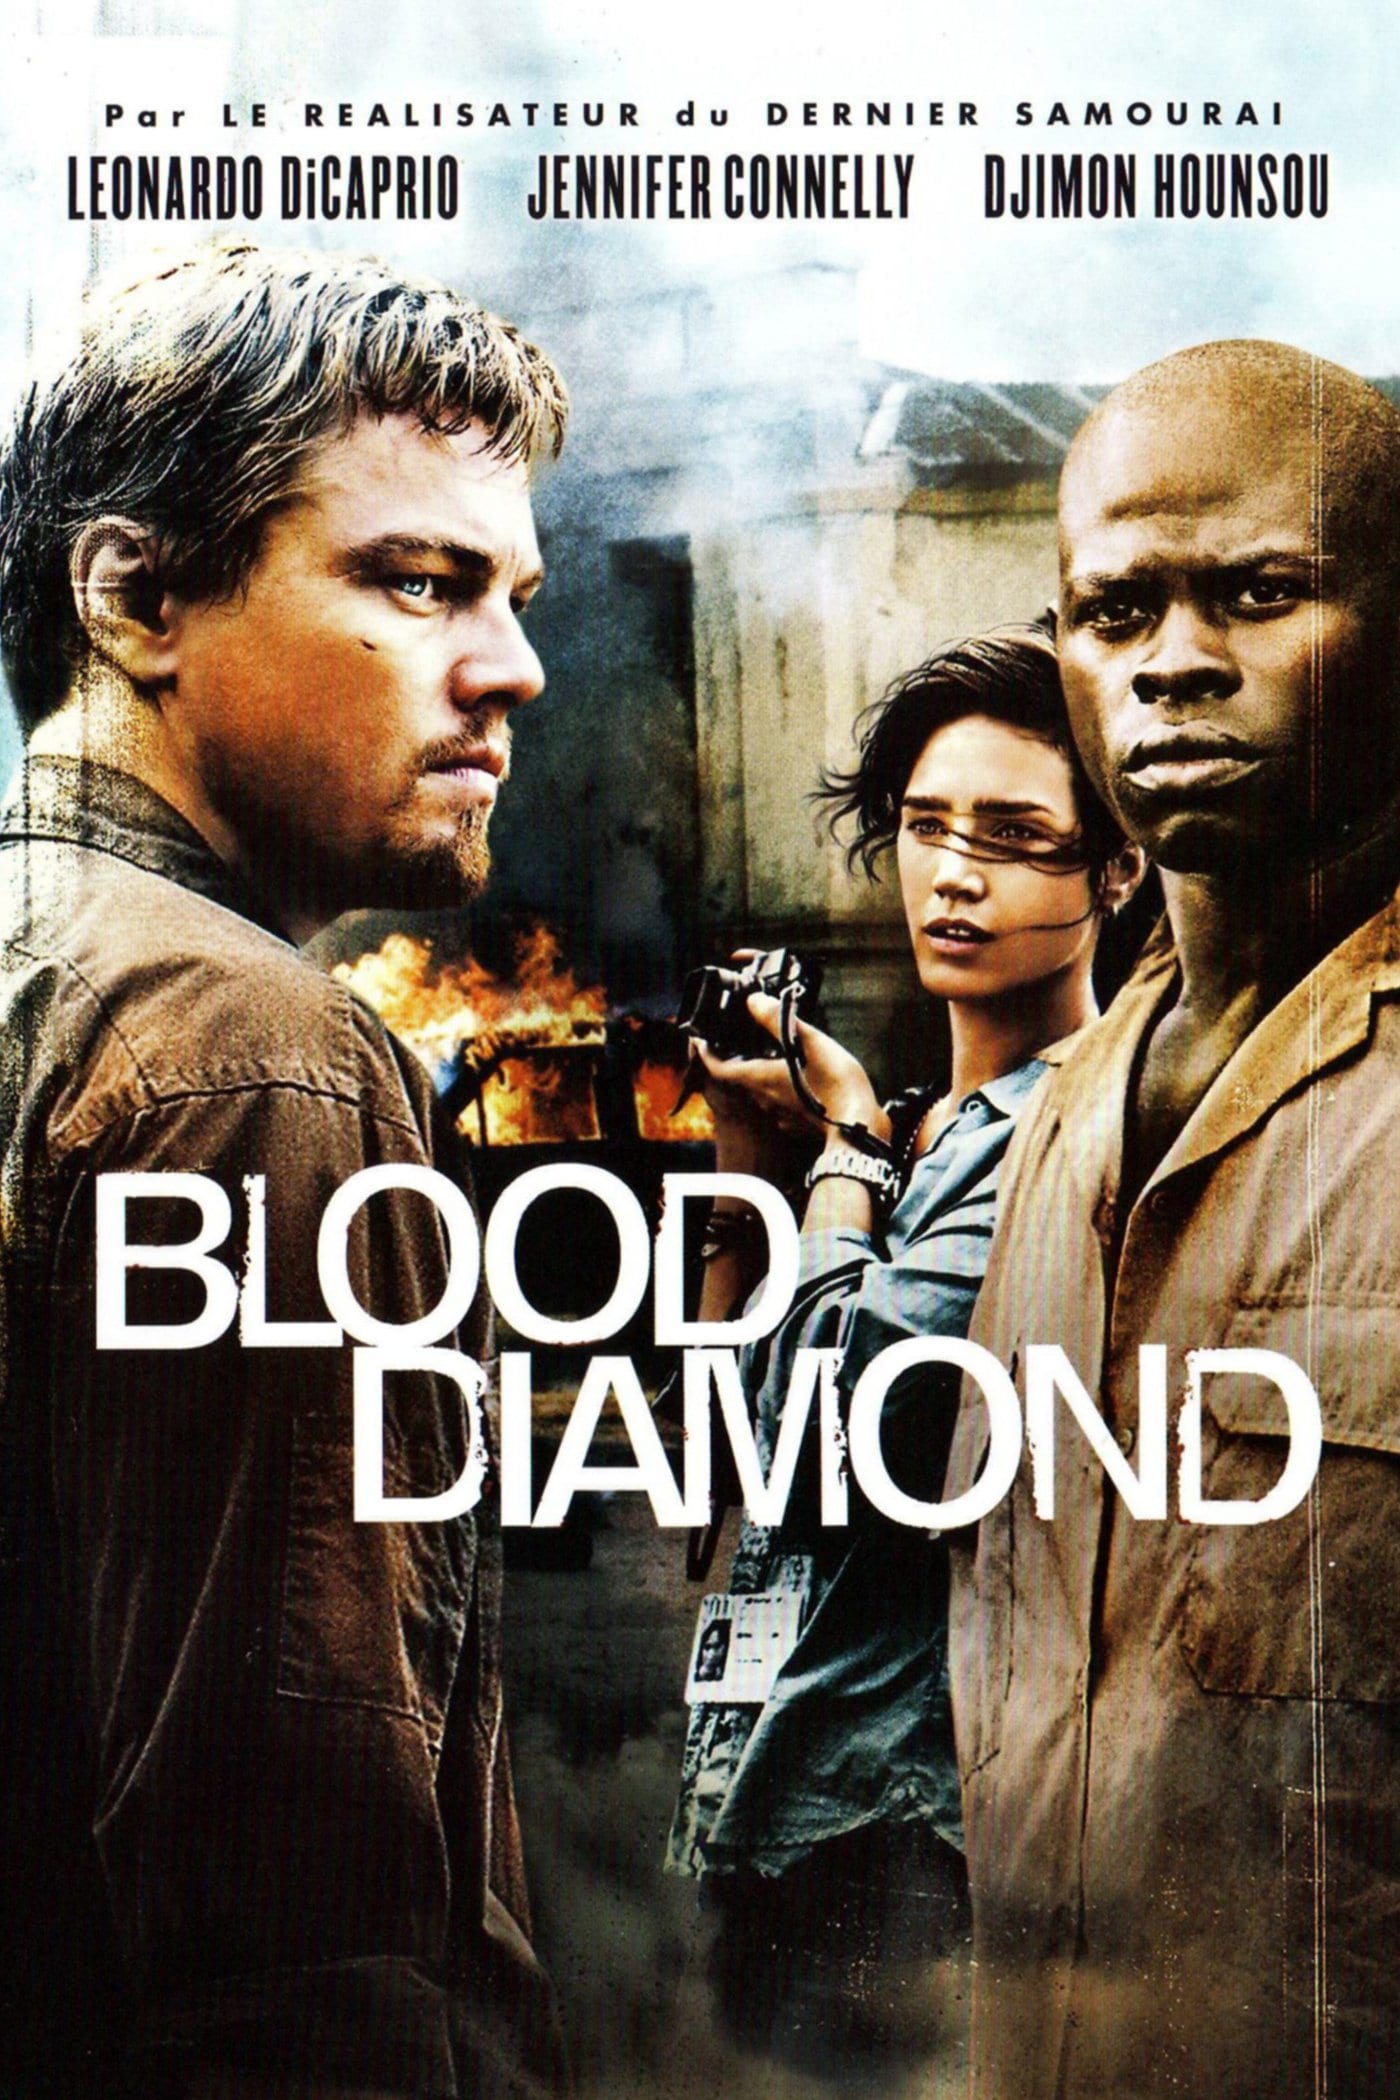 how much is the diamond in blood diamond worth